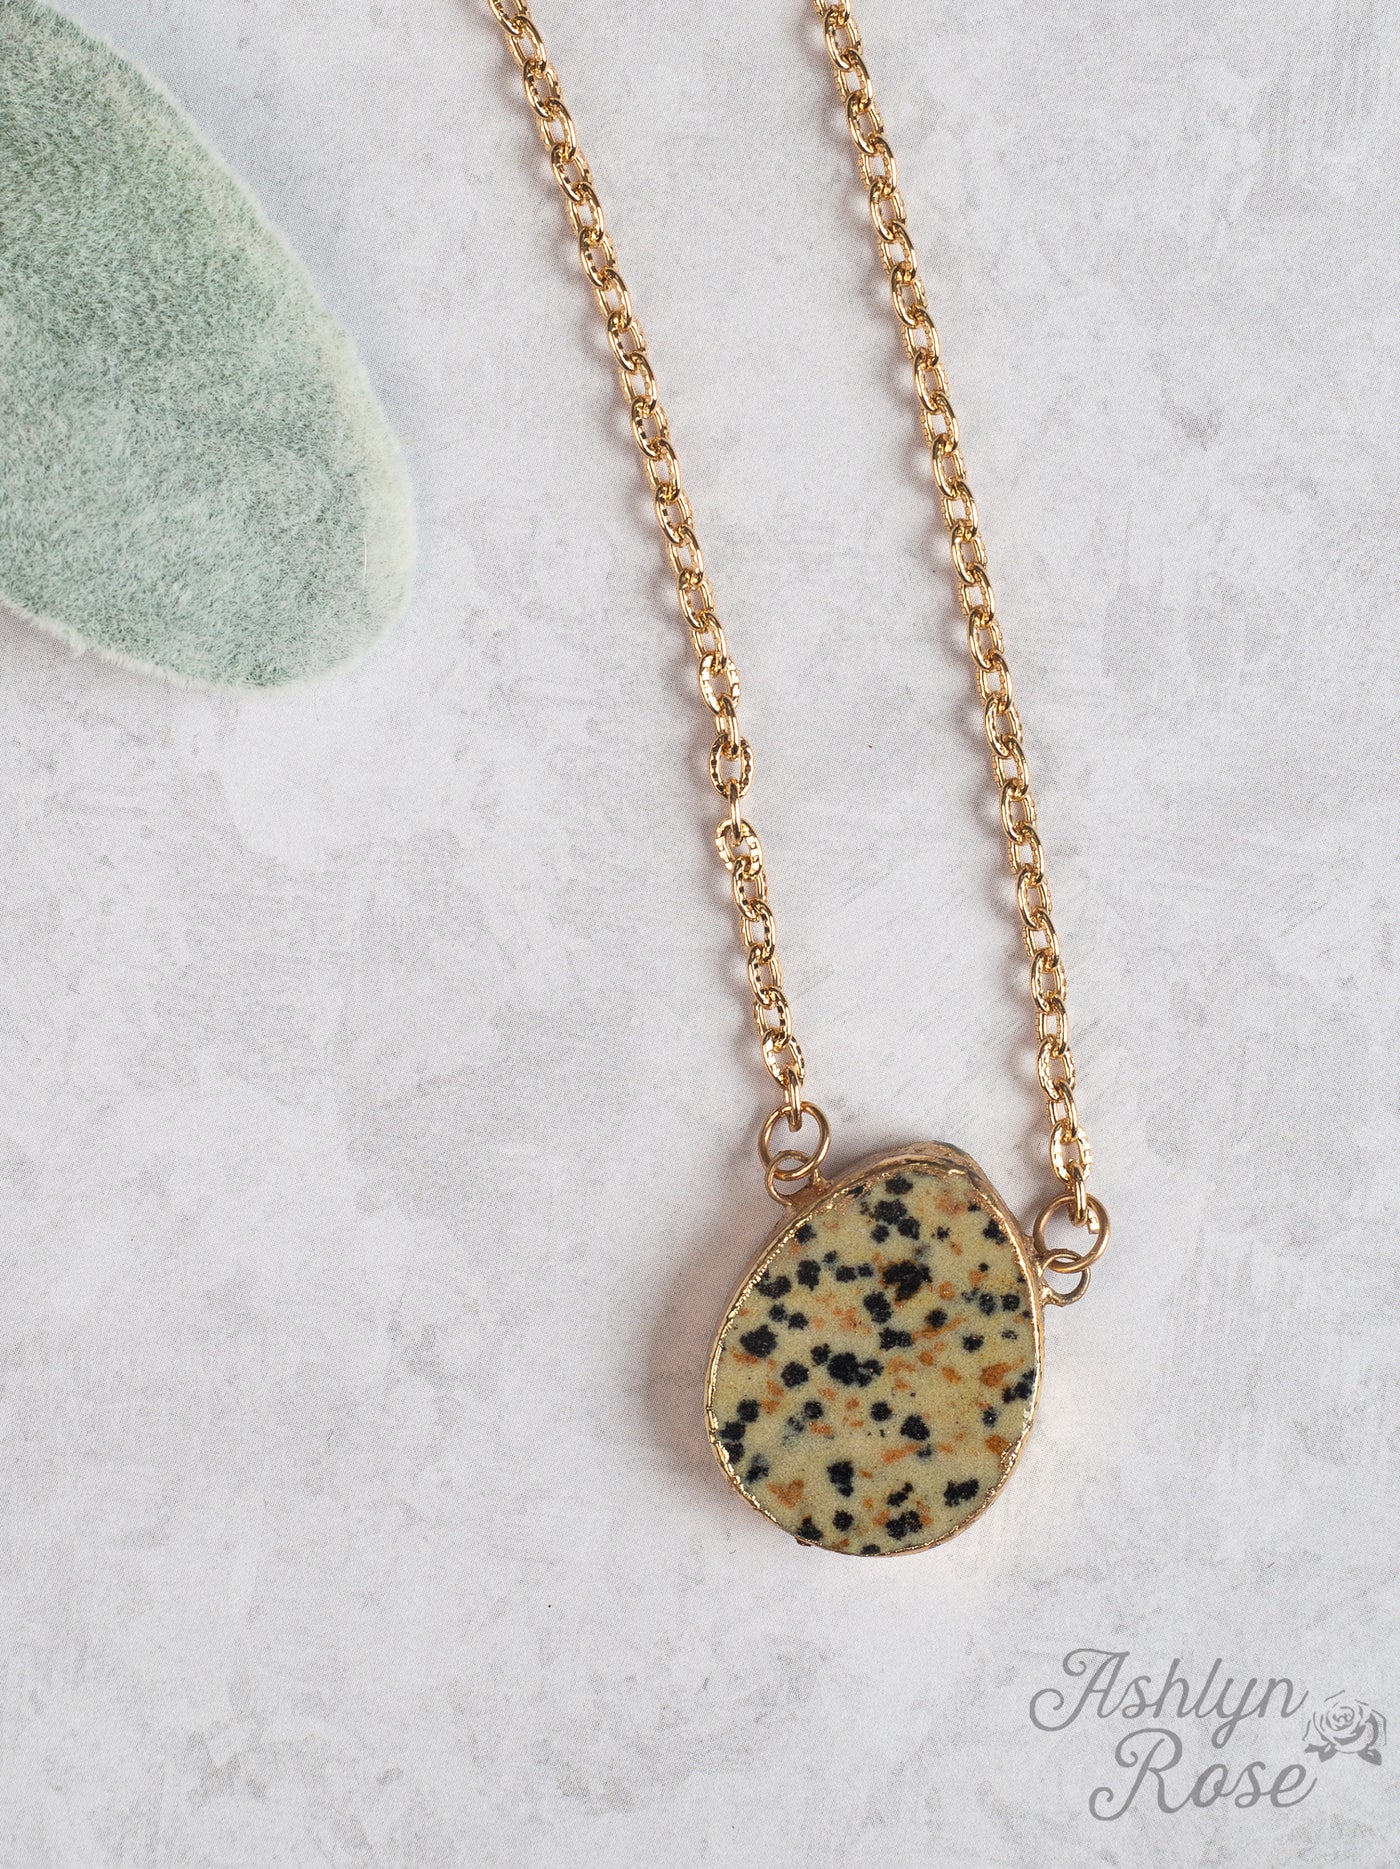 Spotted You Gold Chain Necklace with Natural Gem Stone